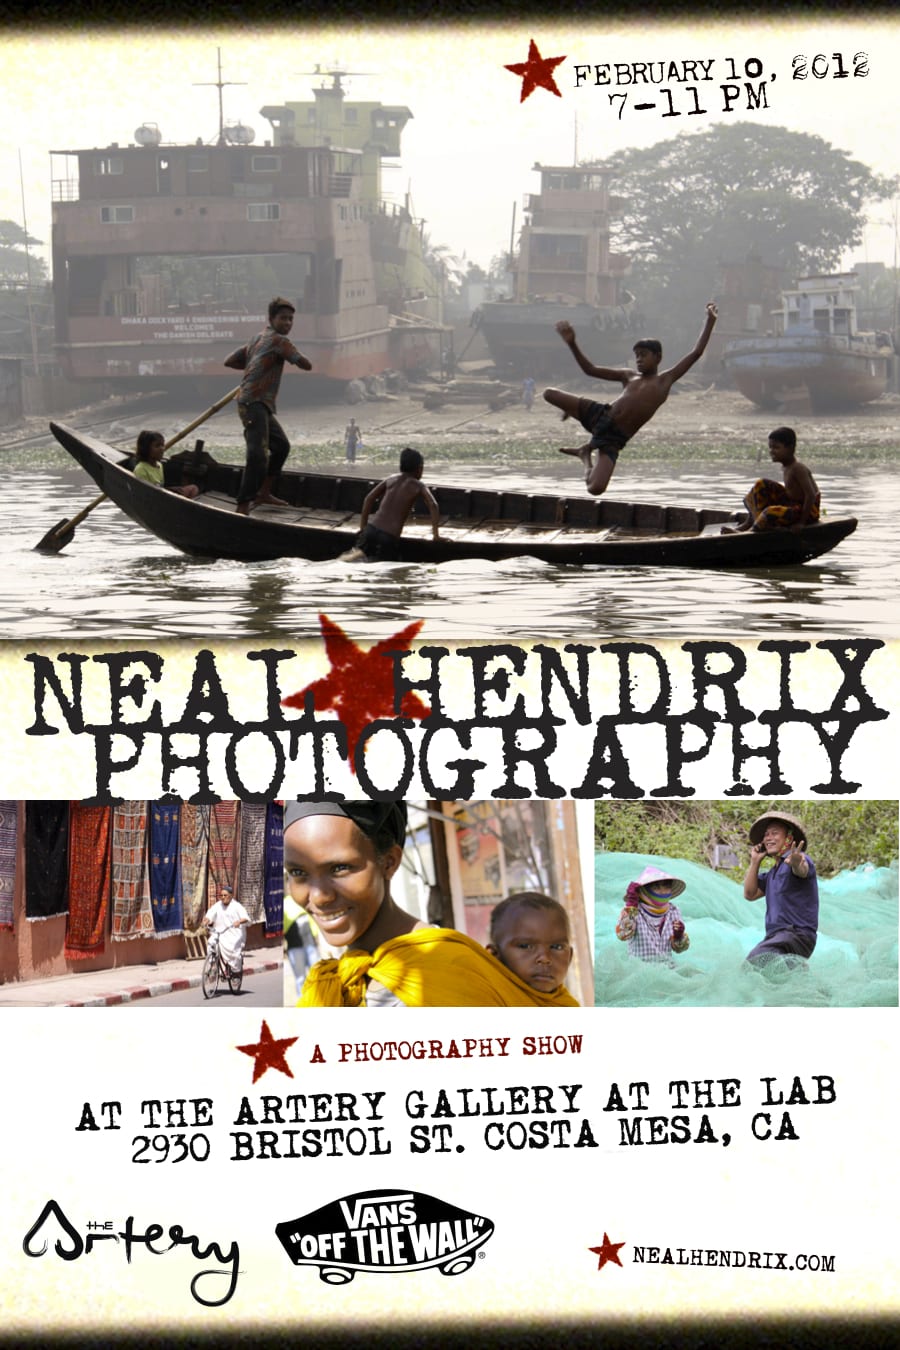 Neil Hendrix Photography at the Artery Gallery in Costa Mesa